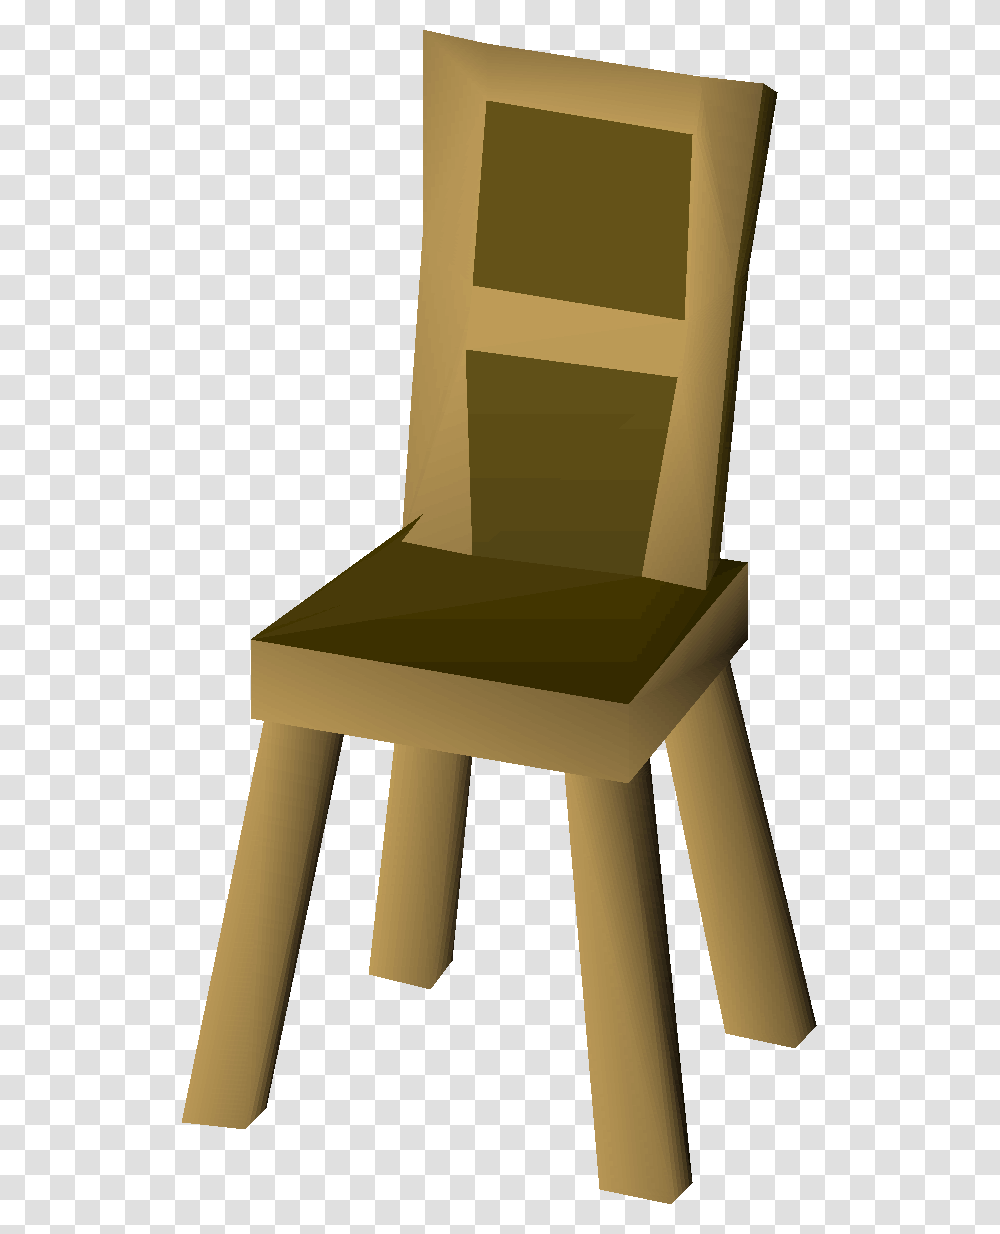 Rope And Chair Osrs, Furniture, Bar Stool, Box Transparent Png